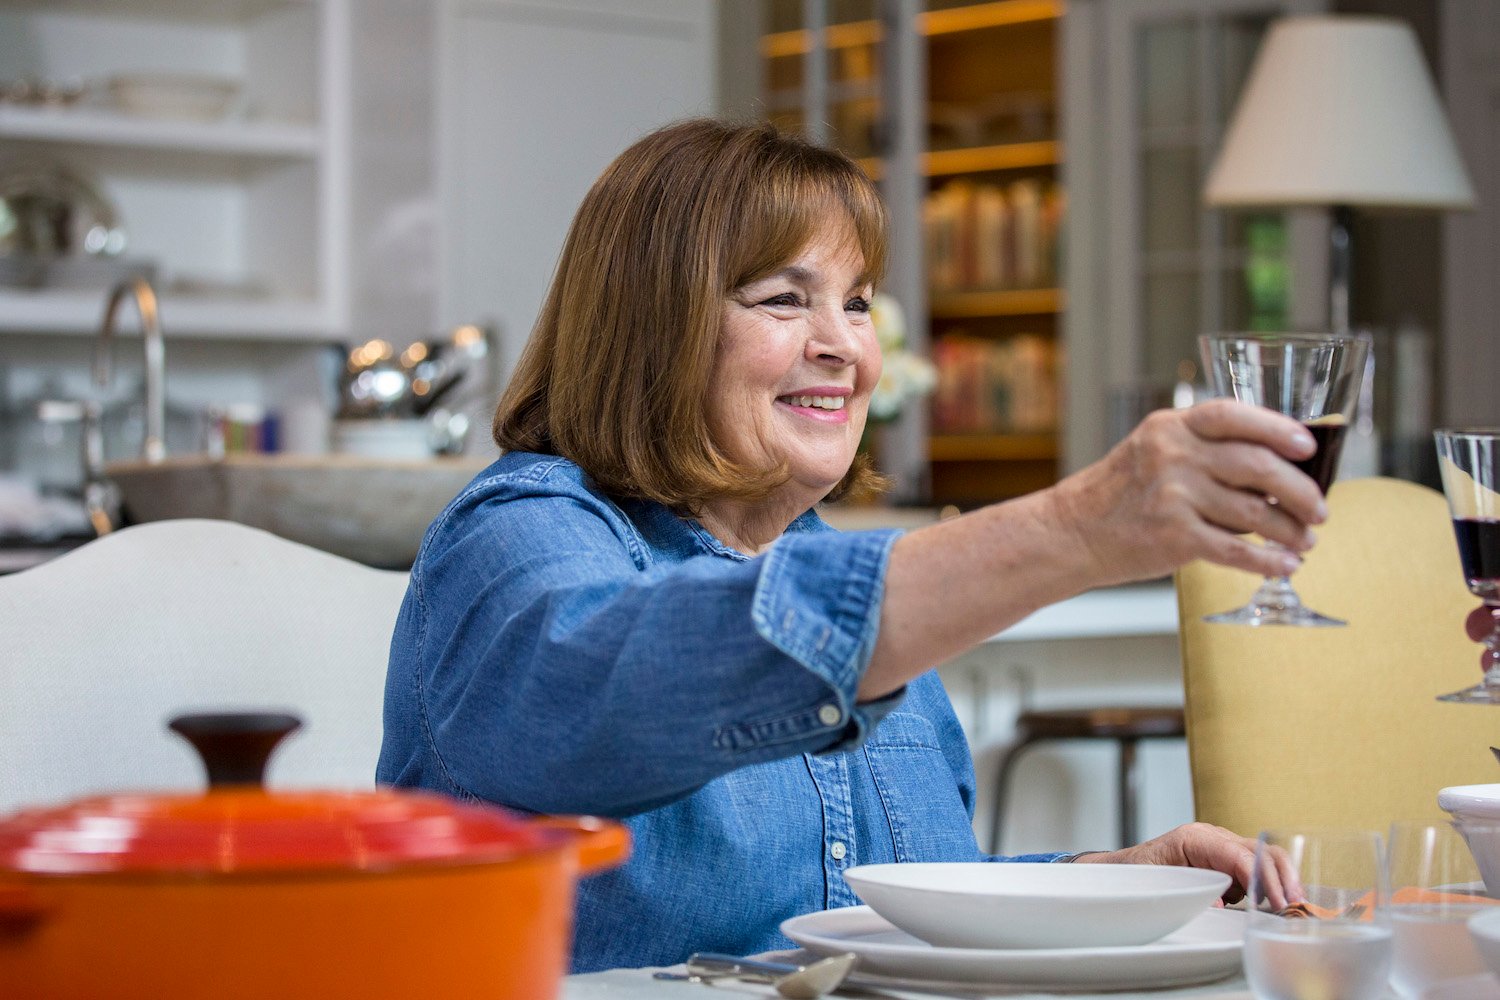 Ina Garten toasts with a glass of wine while wearing a blue denim shirt on 'Sunday Today'